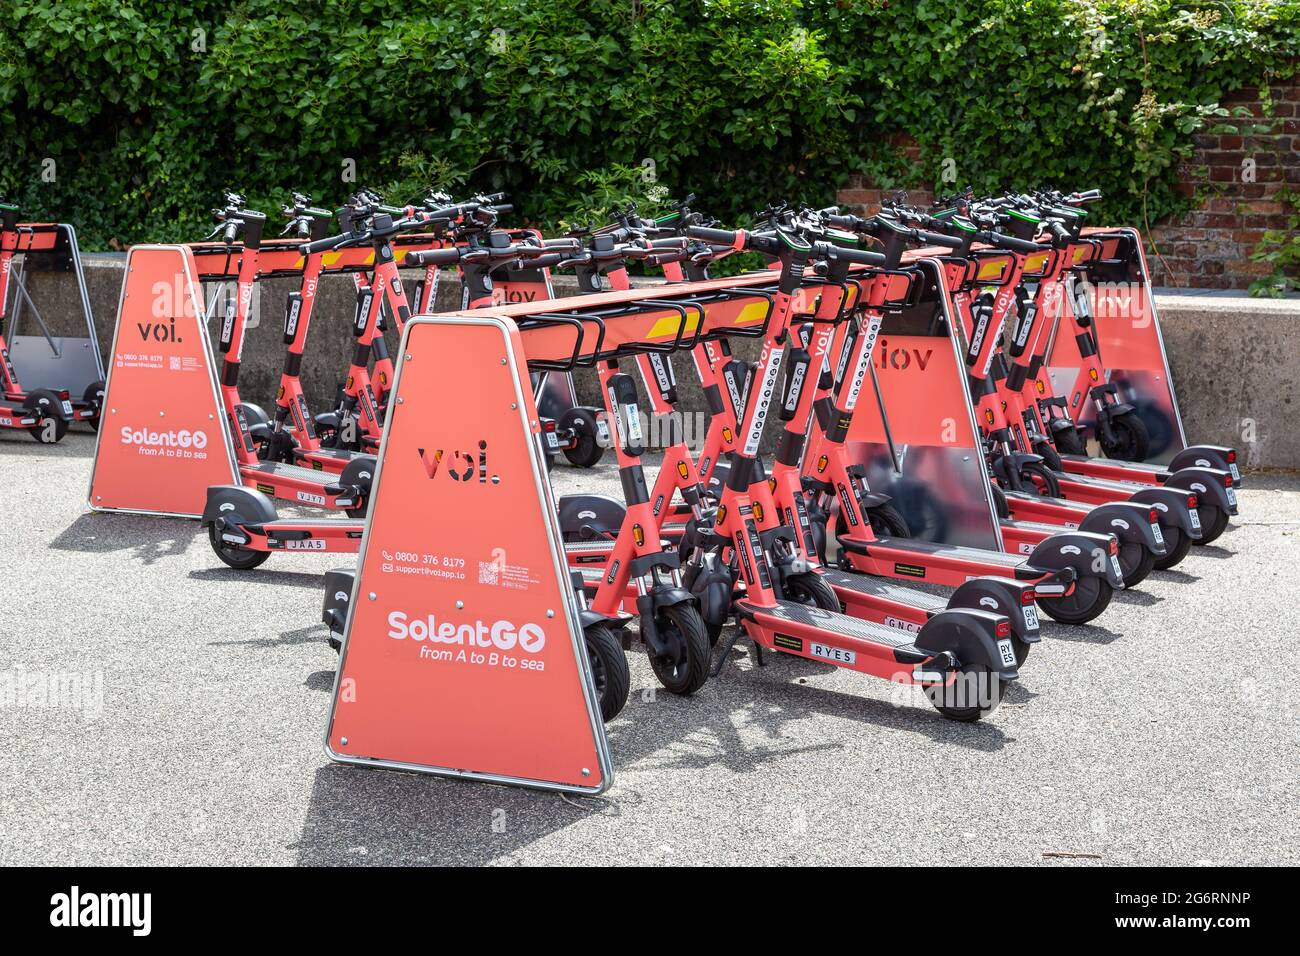 A Voi e-Scooter parking station filled with scooters for hire Stock Photo